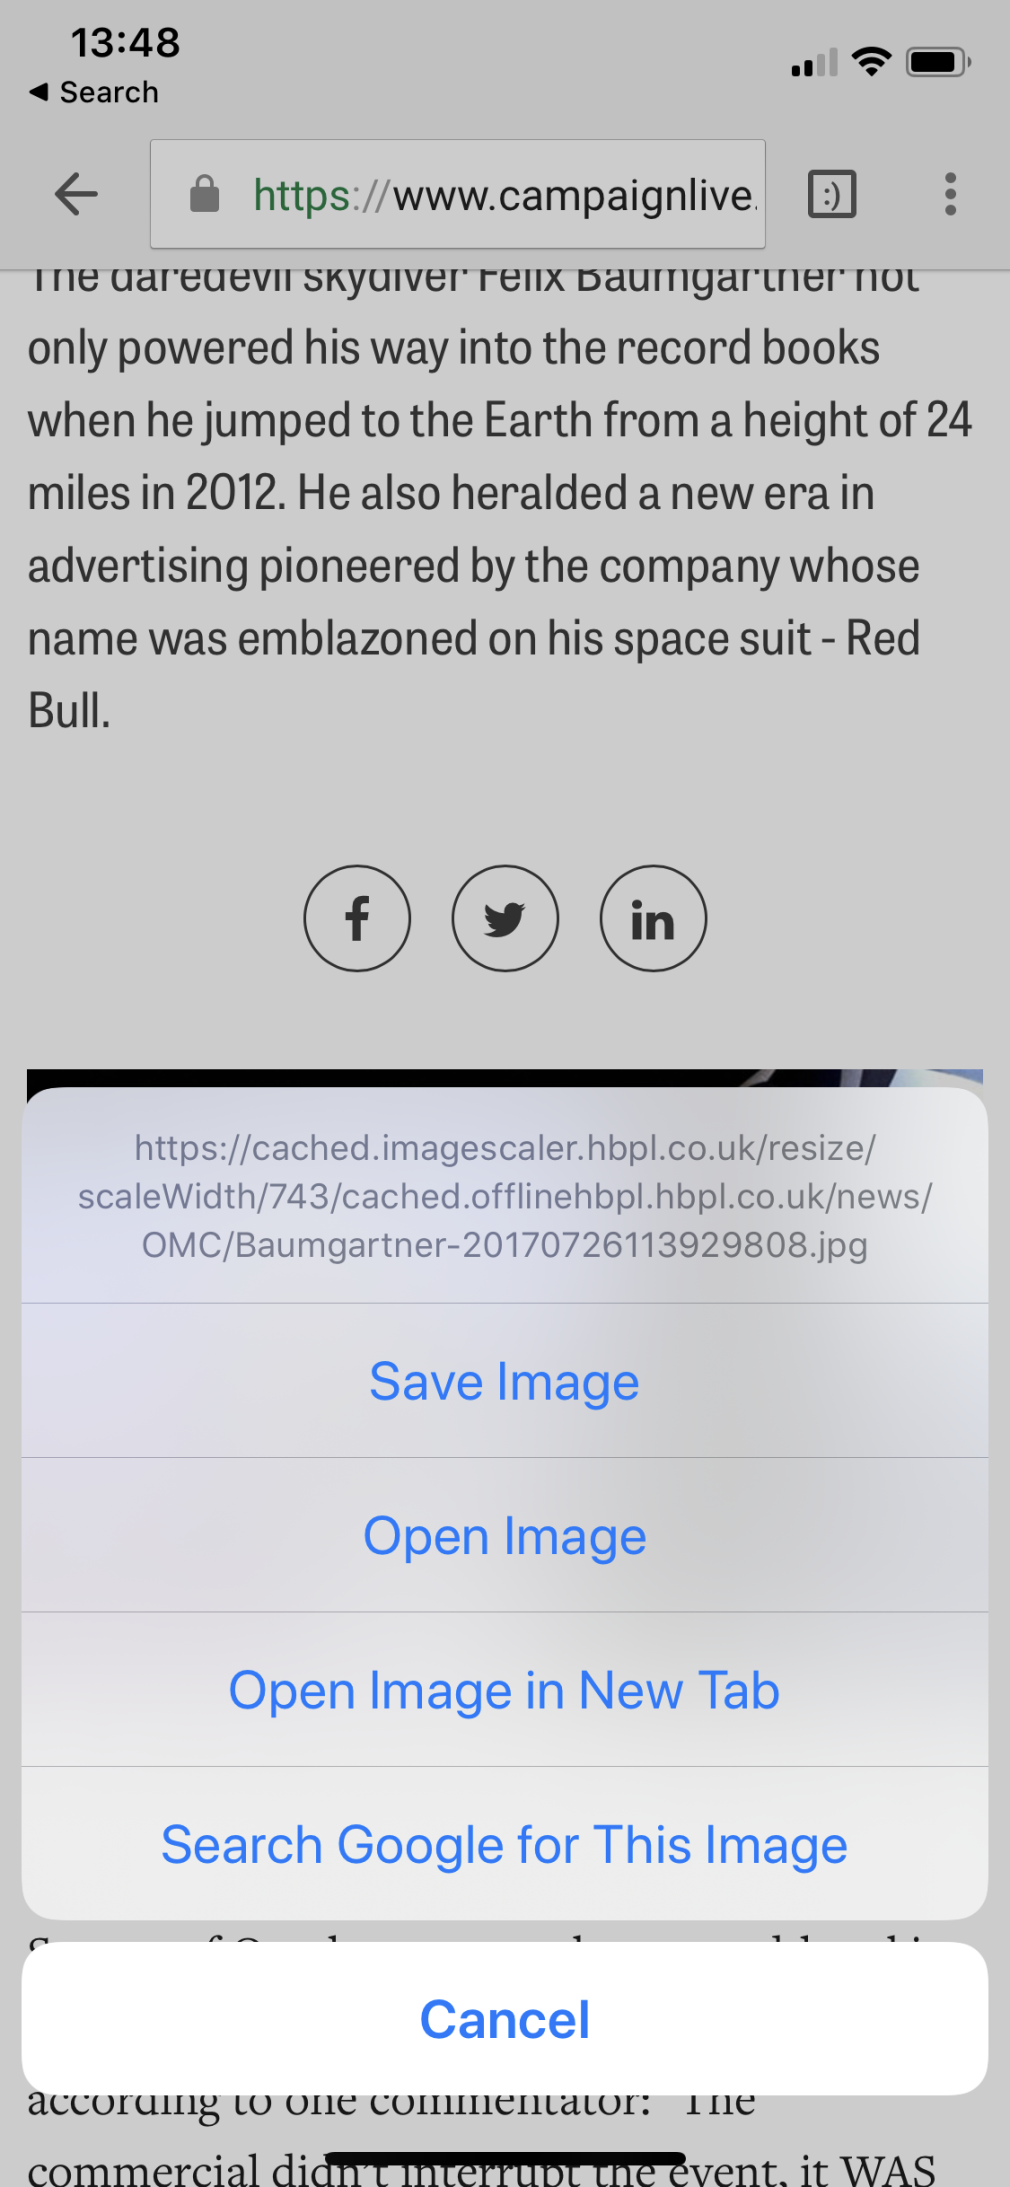 How To Do A Reverse Image Search On Both Desktop And Mobile